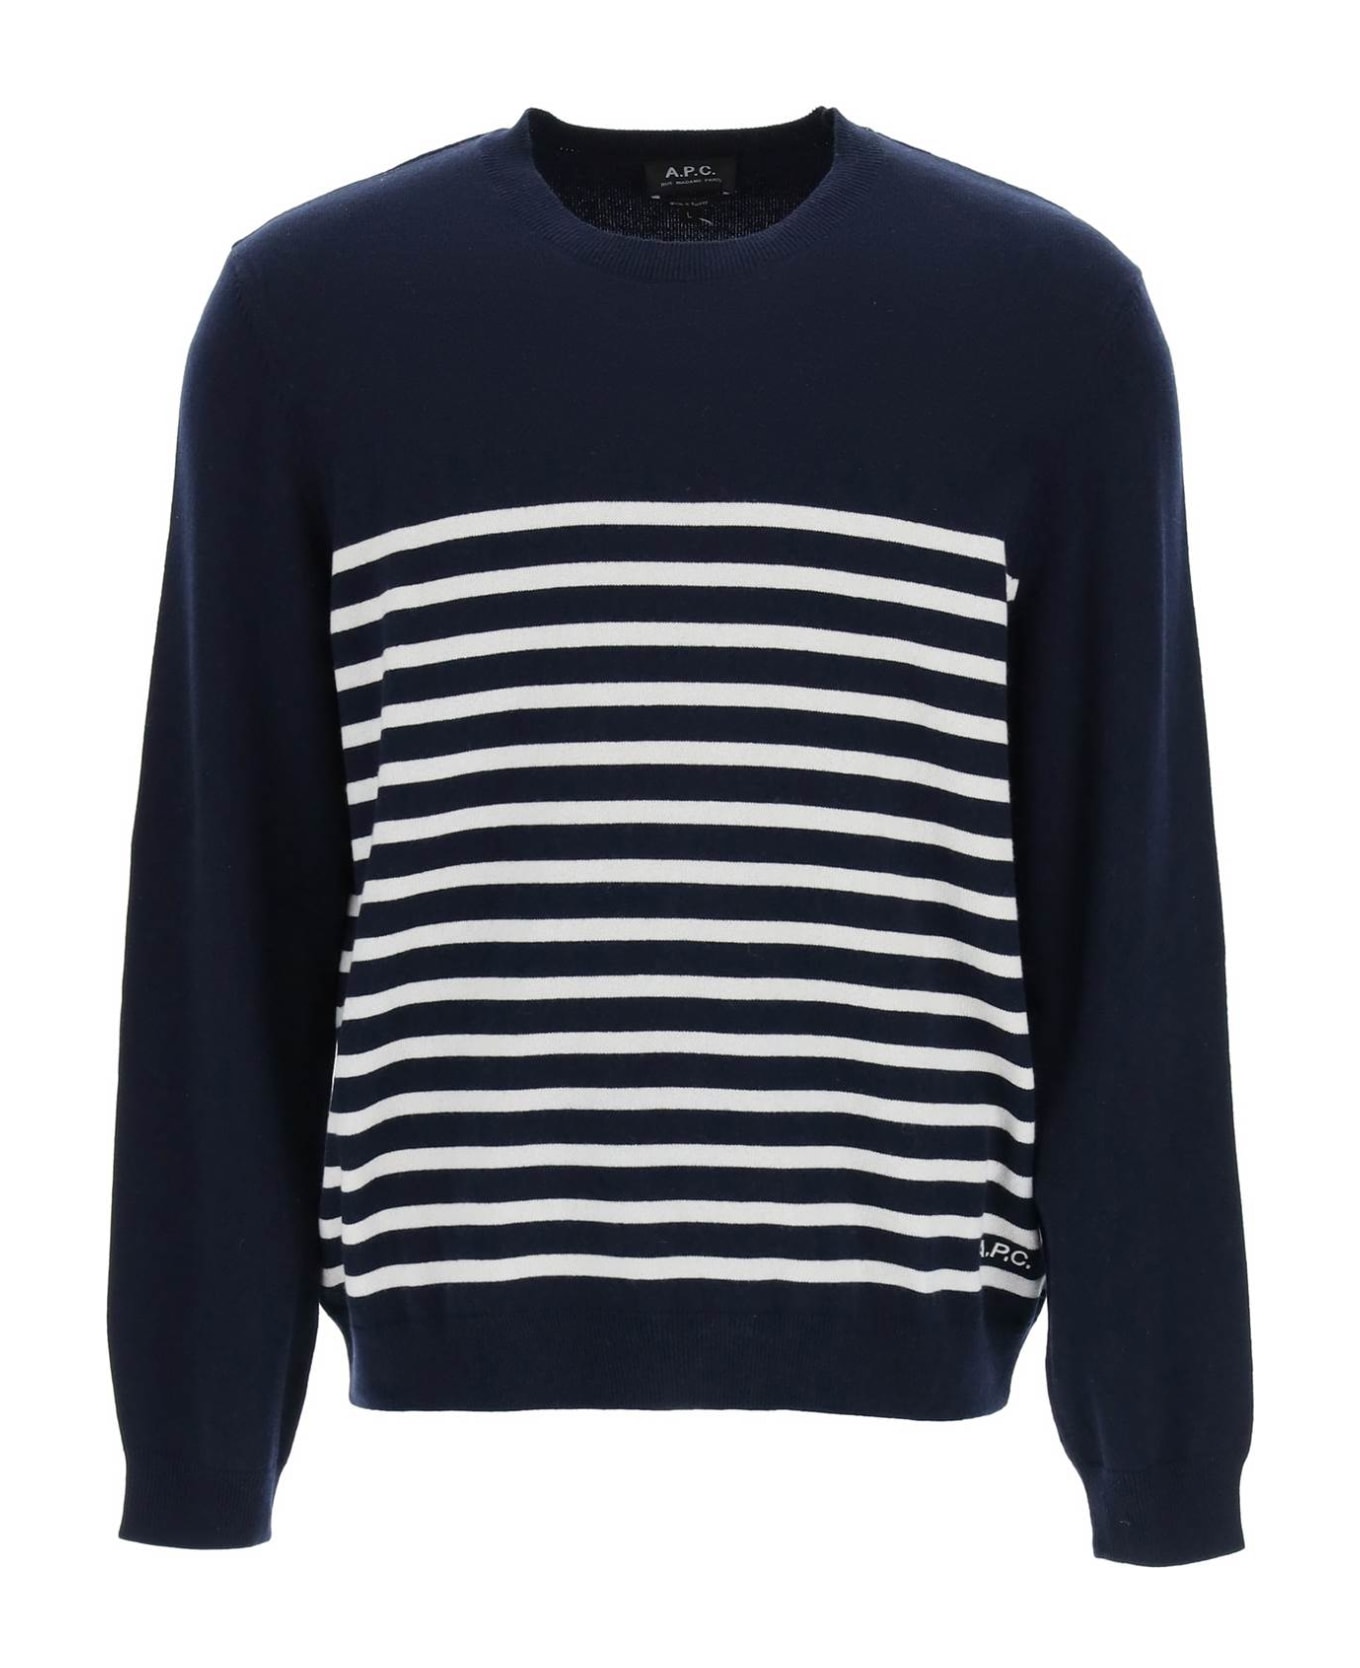 A.P.C. Striped Cashmere And Cotton Pullover - DARK NAVY